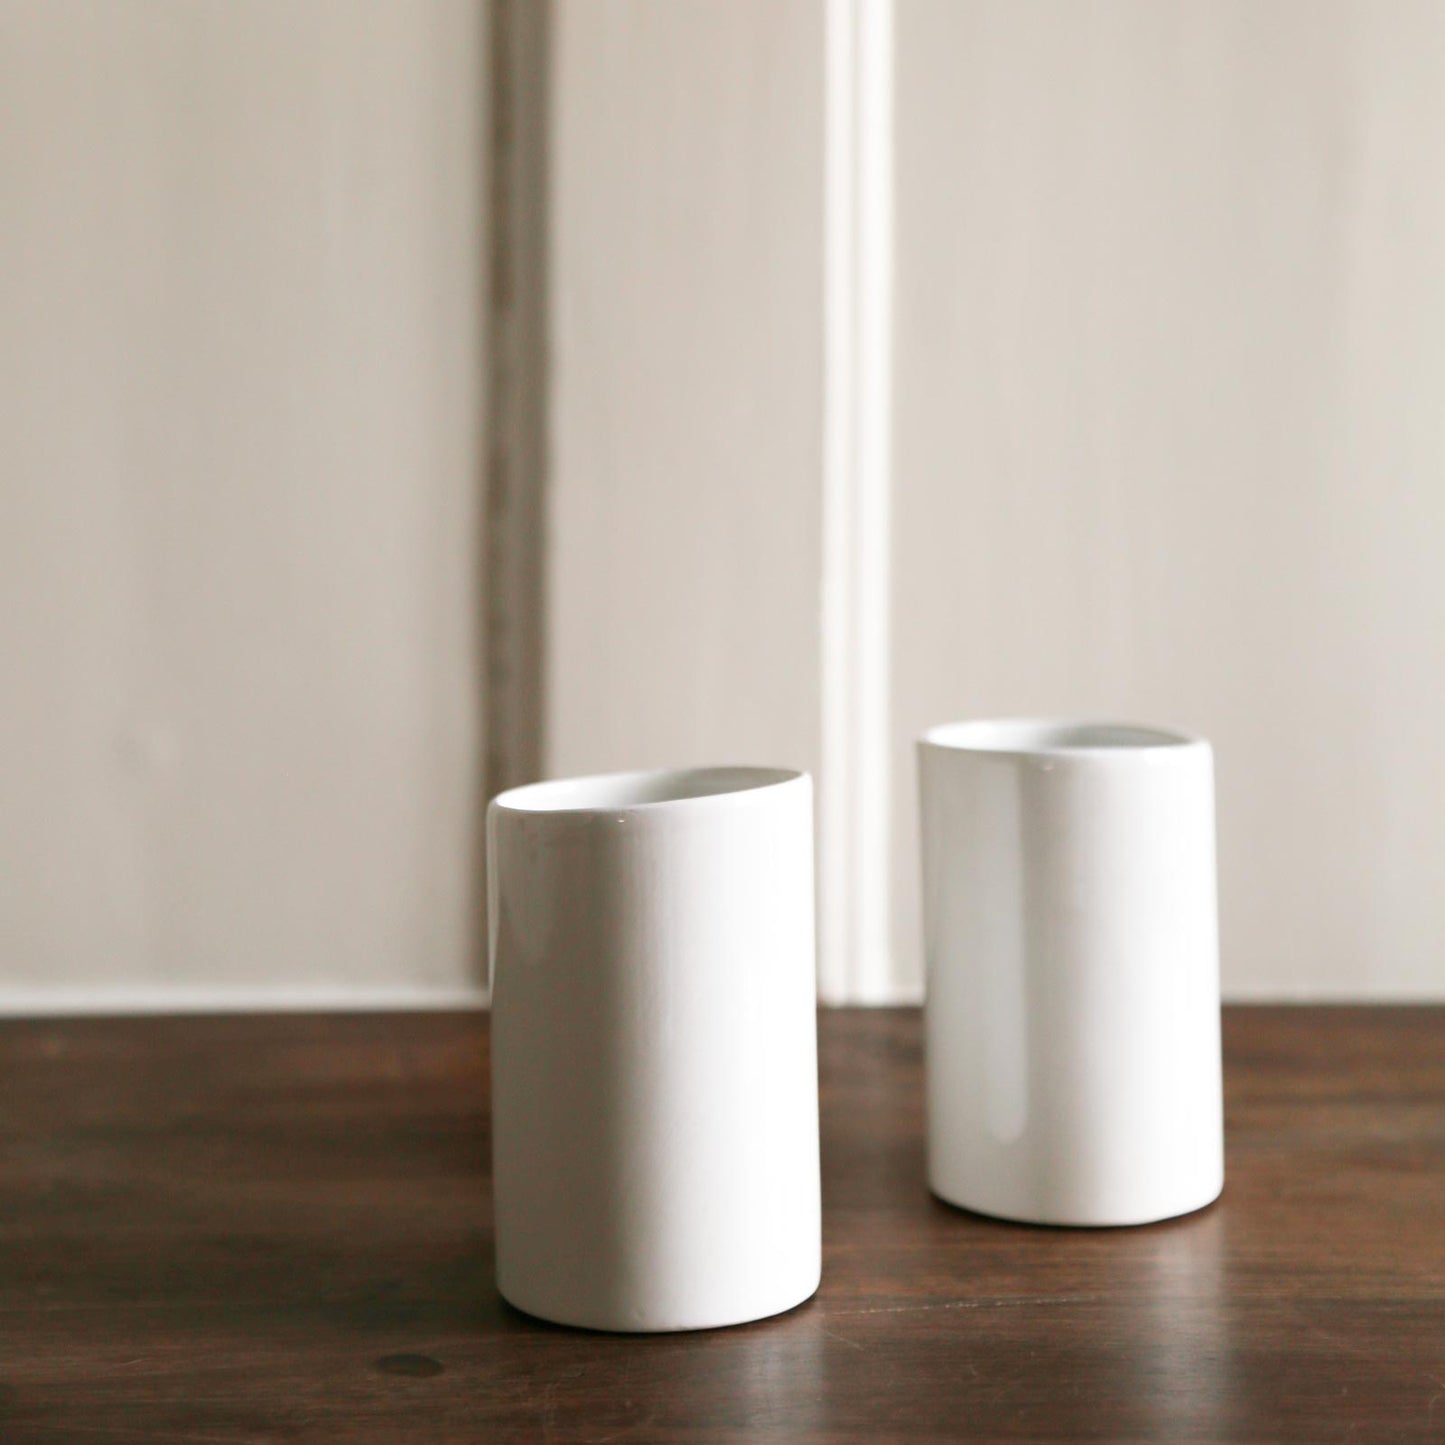 Two Cylindric Cups